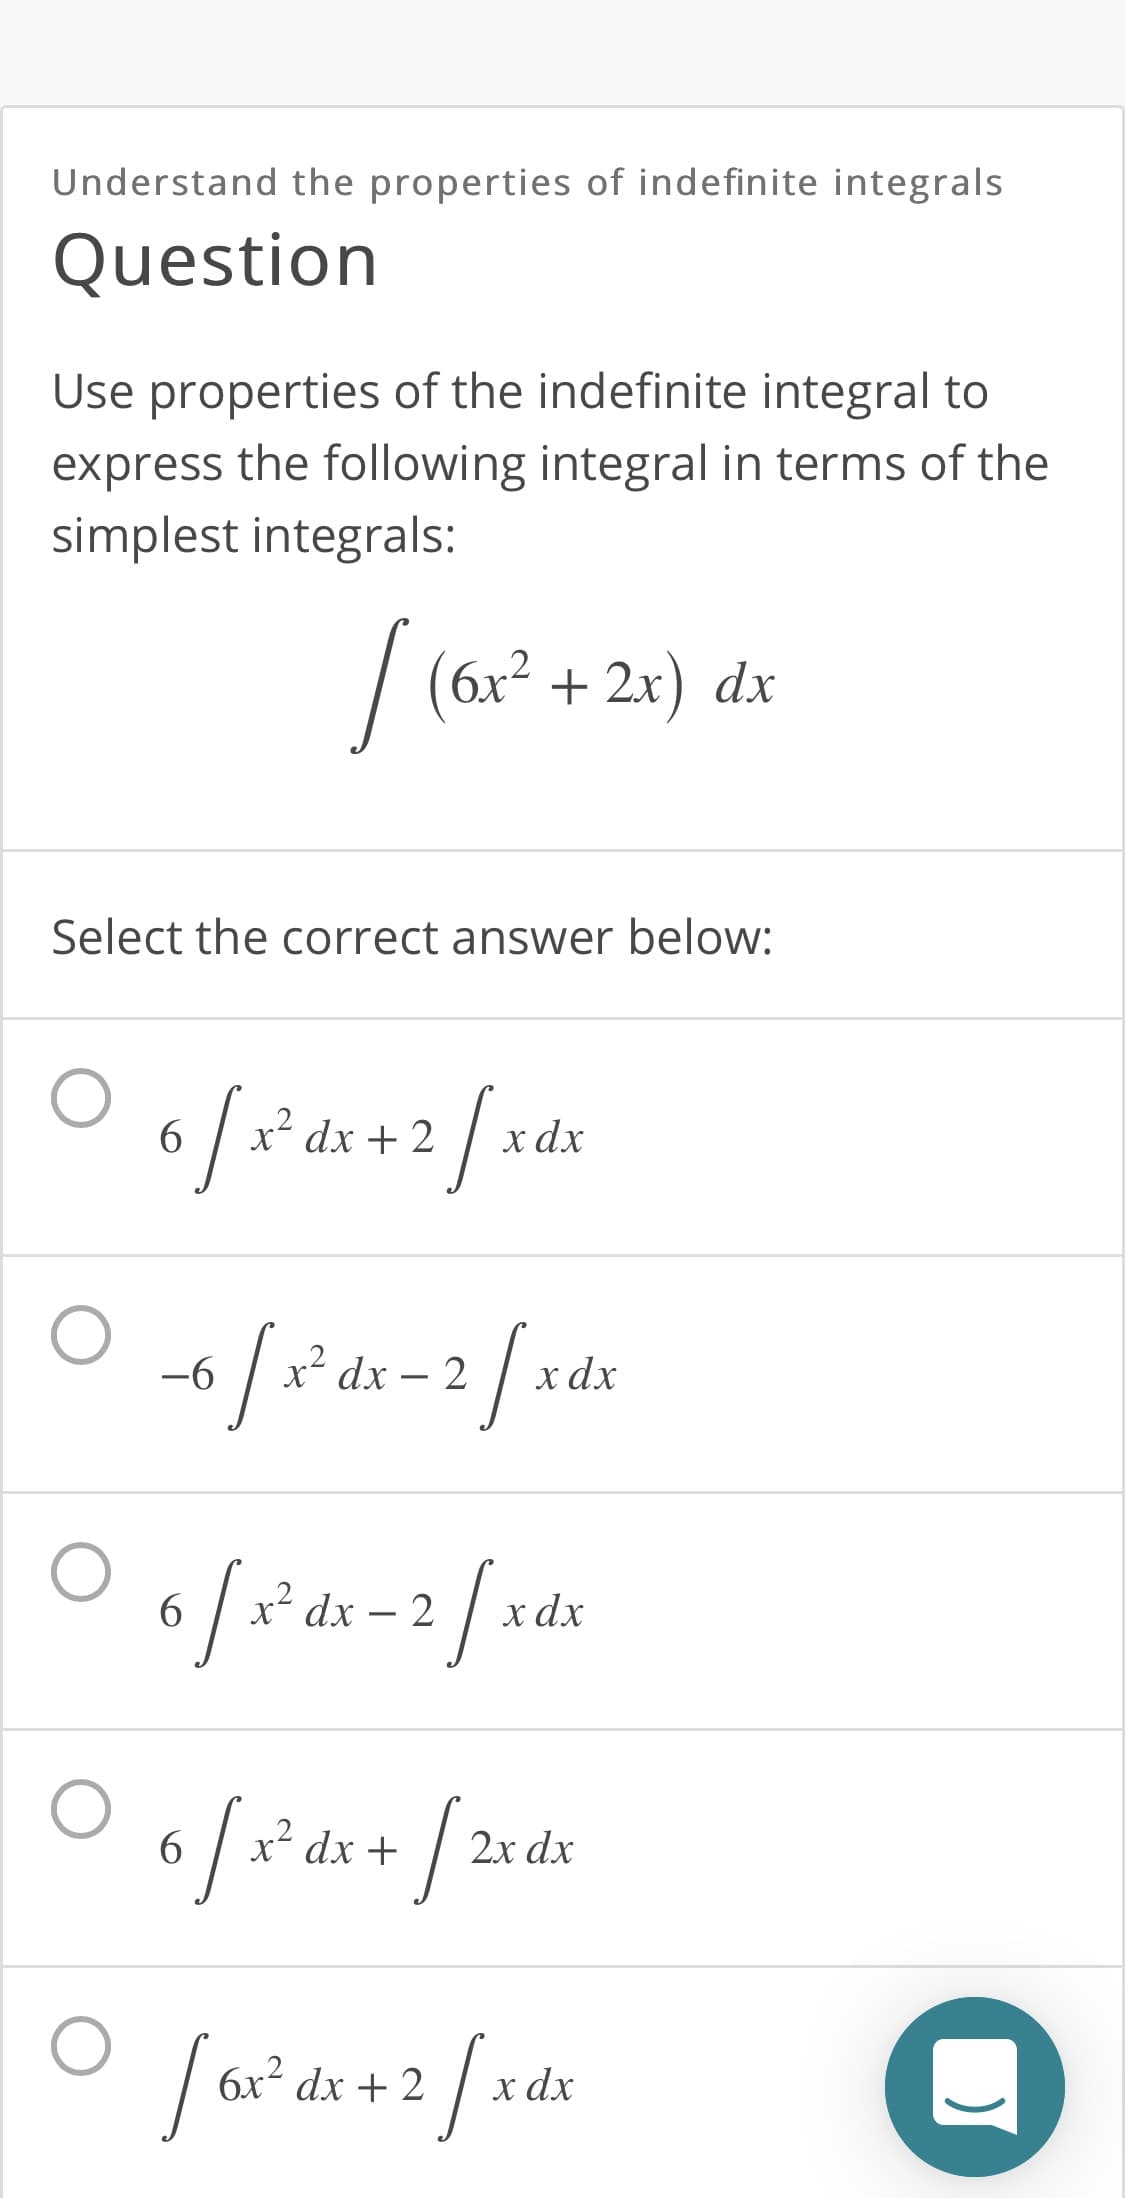 Understand the properties of indefinite integrals
Question
Use properties of the indefinite integral to
express the following integral in terms of the
simplest integrals:
| ( + 2x) dx
6x²
Select the correct answer below:
dx + 2
x dx
2/*
-6
-96
x² dx – 2
хах
6.
dx – 2
хdx
6.
dx +
2x dx
6x² dx + 2
х dx
